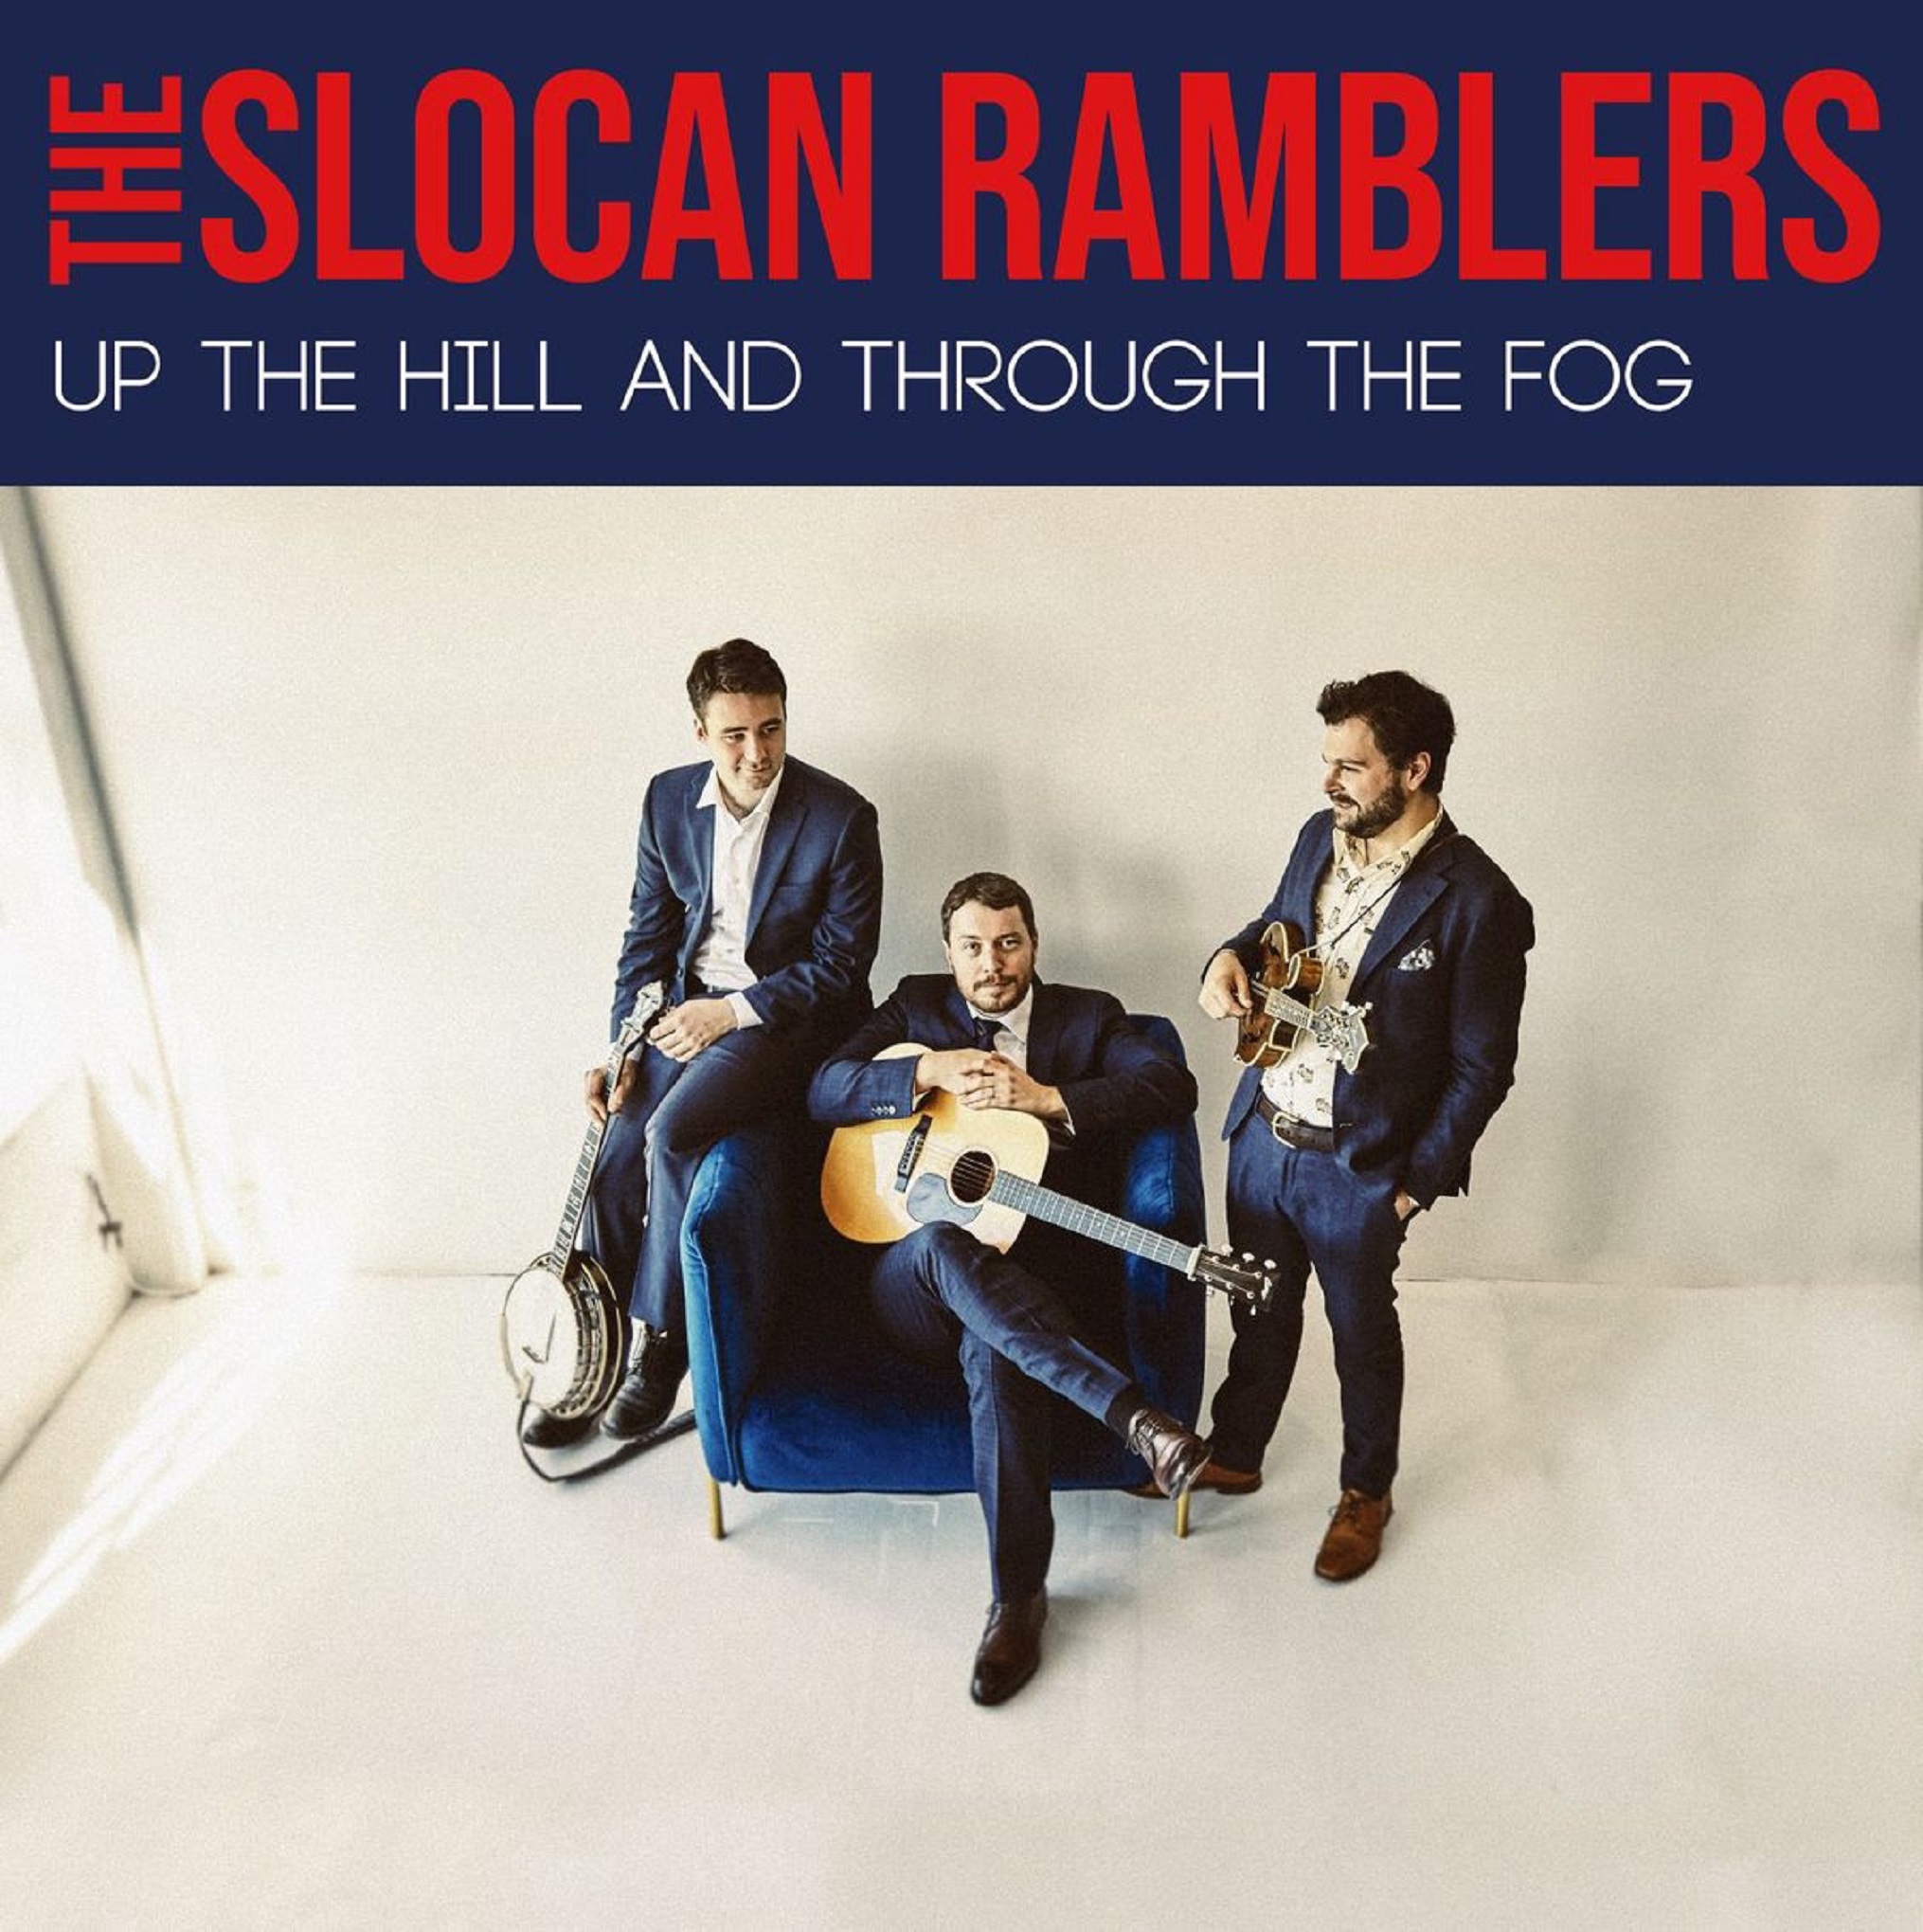 THE SLOCAN RAMBLERS Up the Hill and Through the Fog Out June 10, 2022